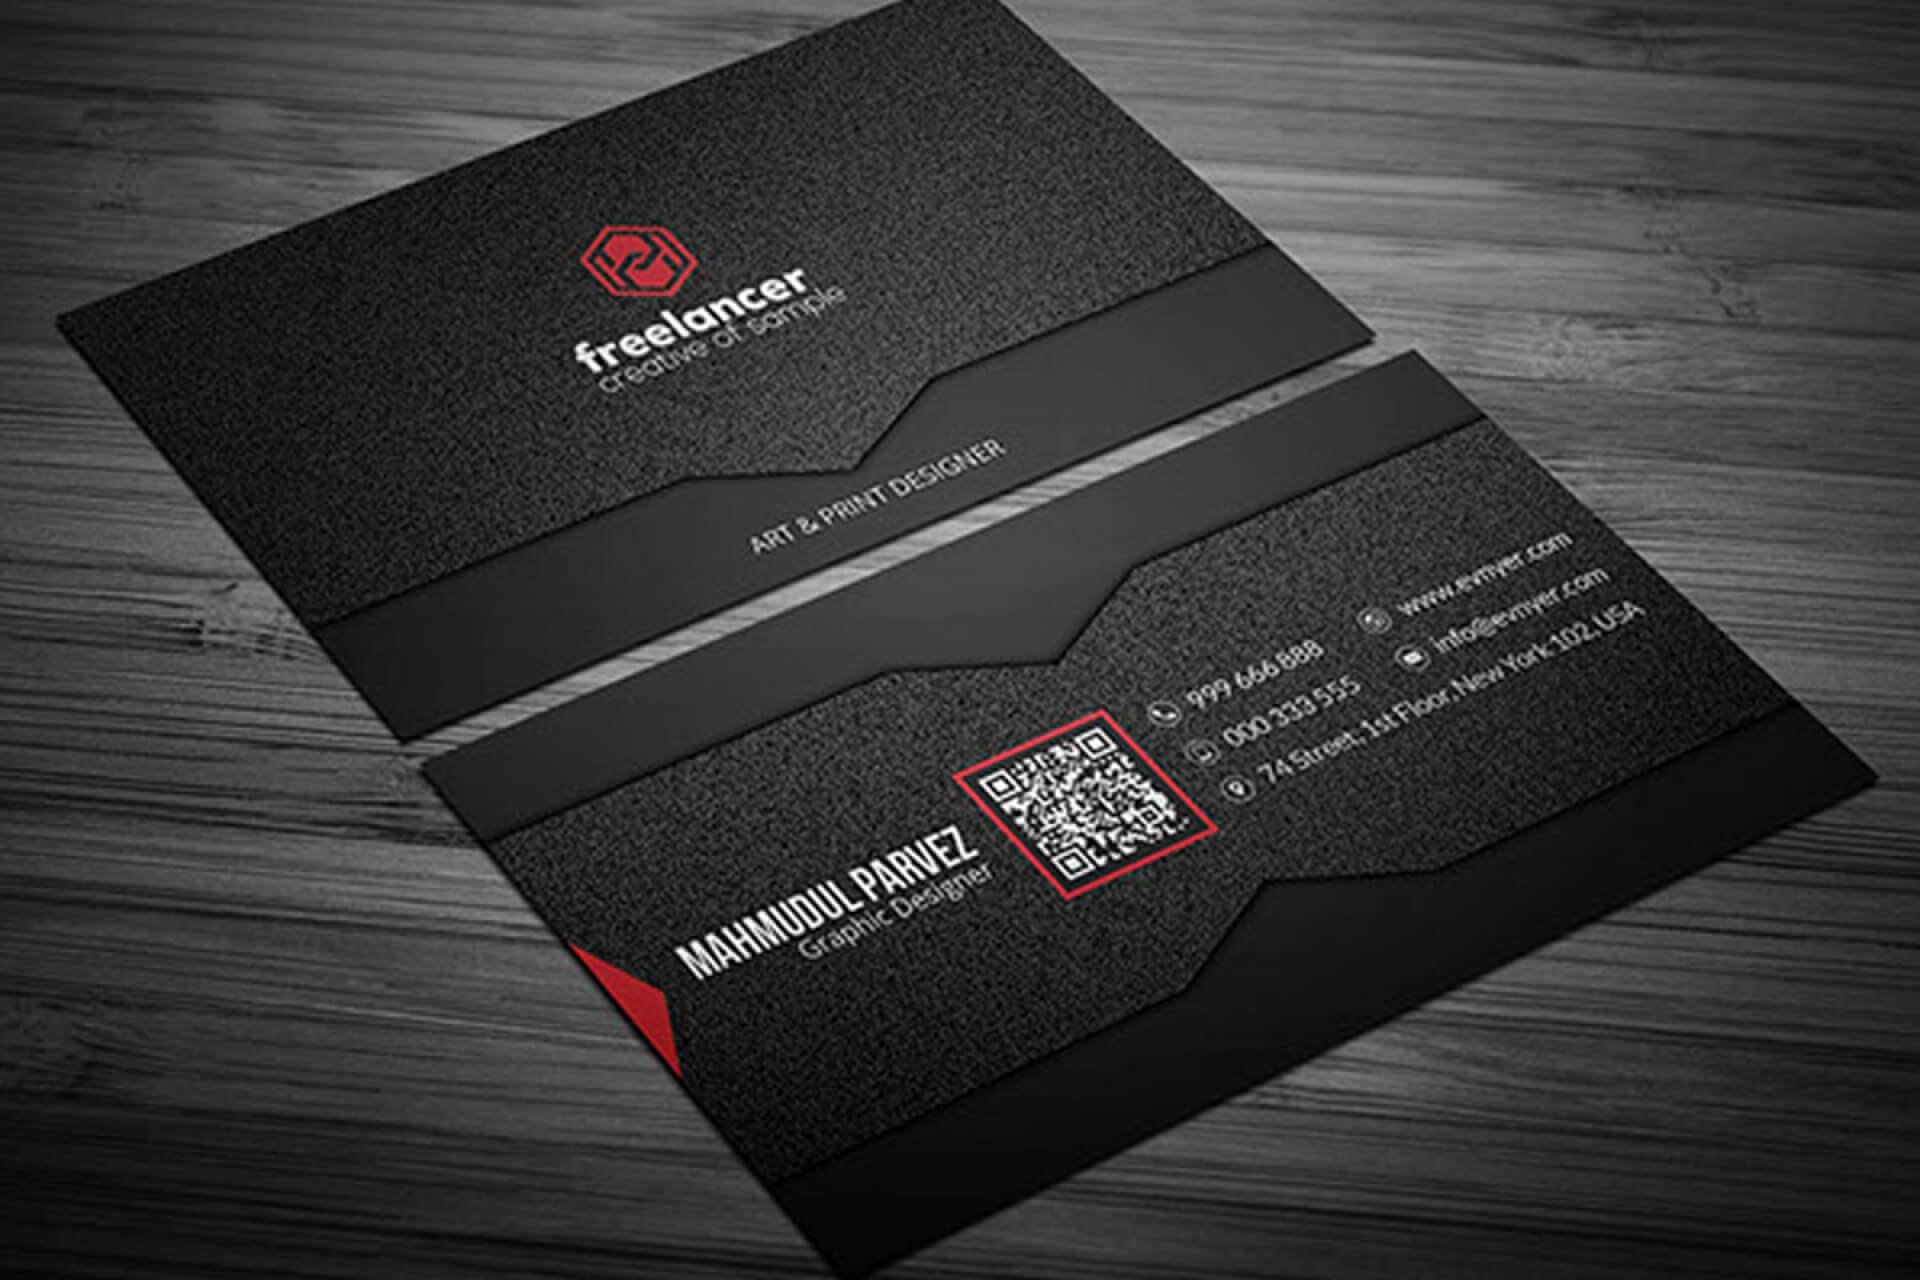 030 Business Card Blank Template Free Download 1920X1280 With Regard To Visiting Card Illustrator Templates Download